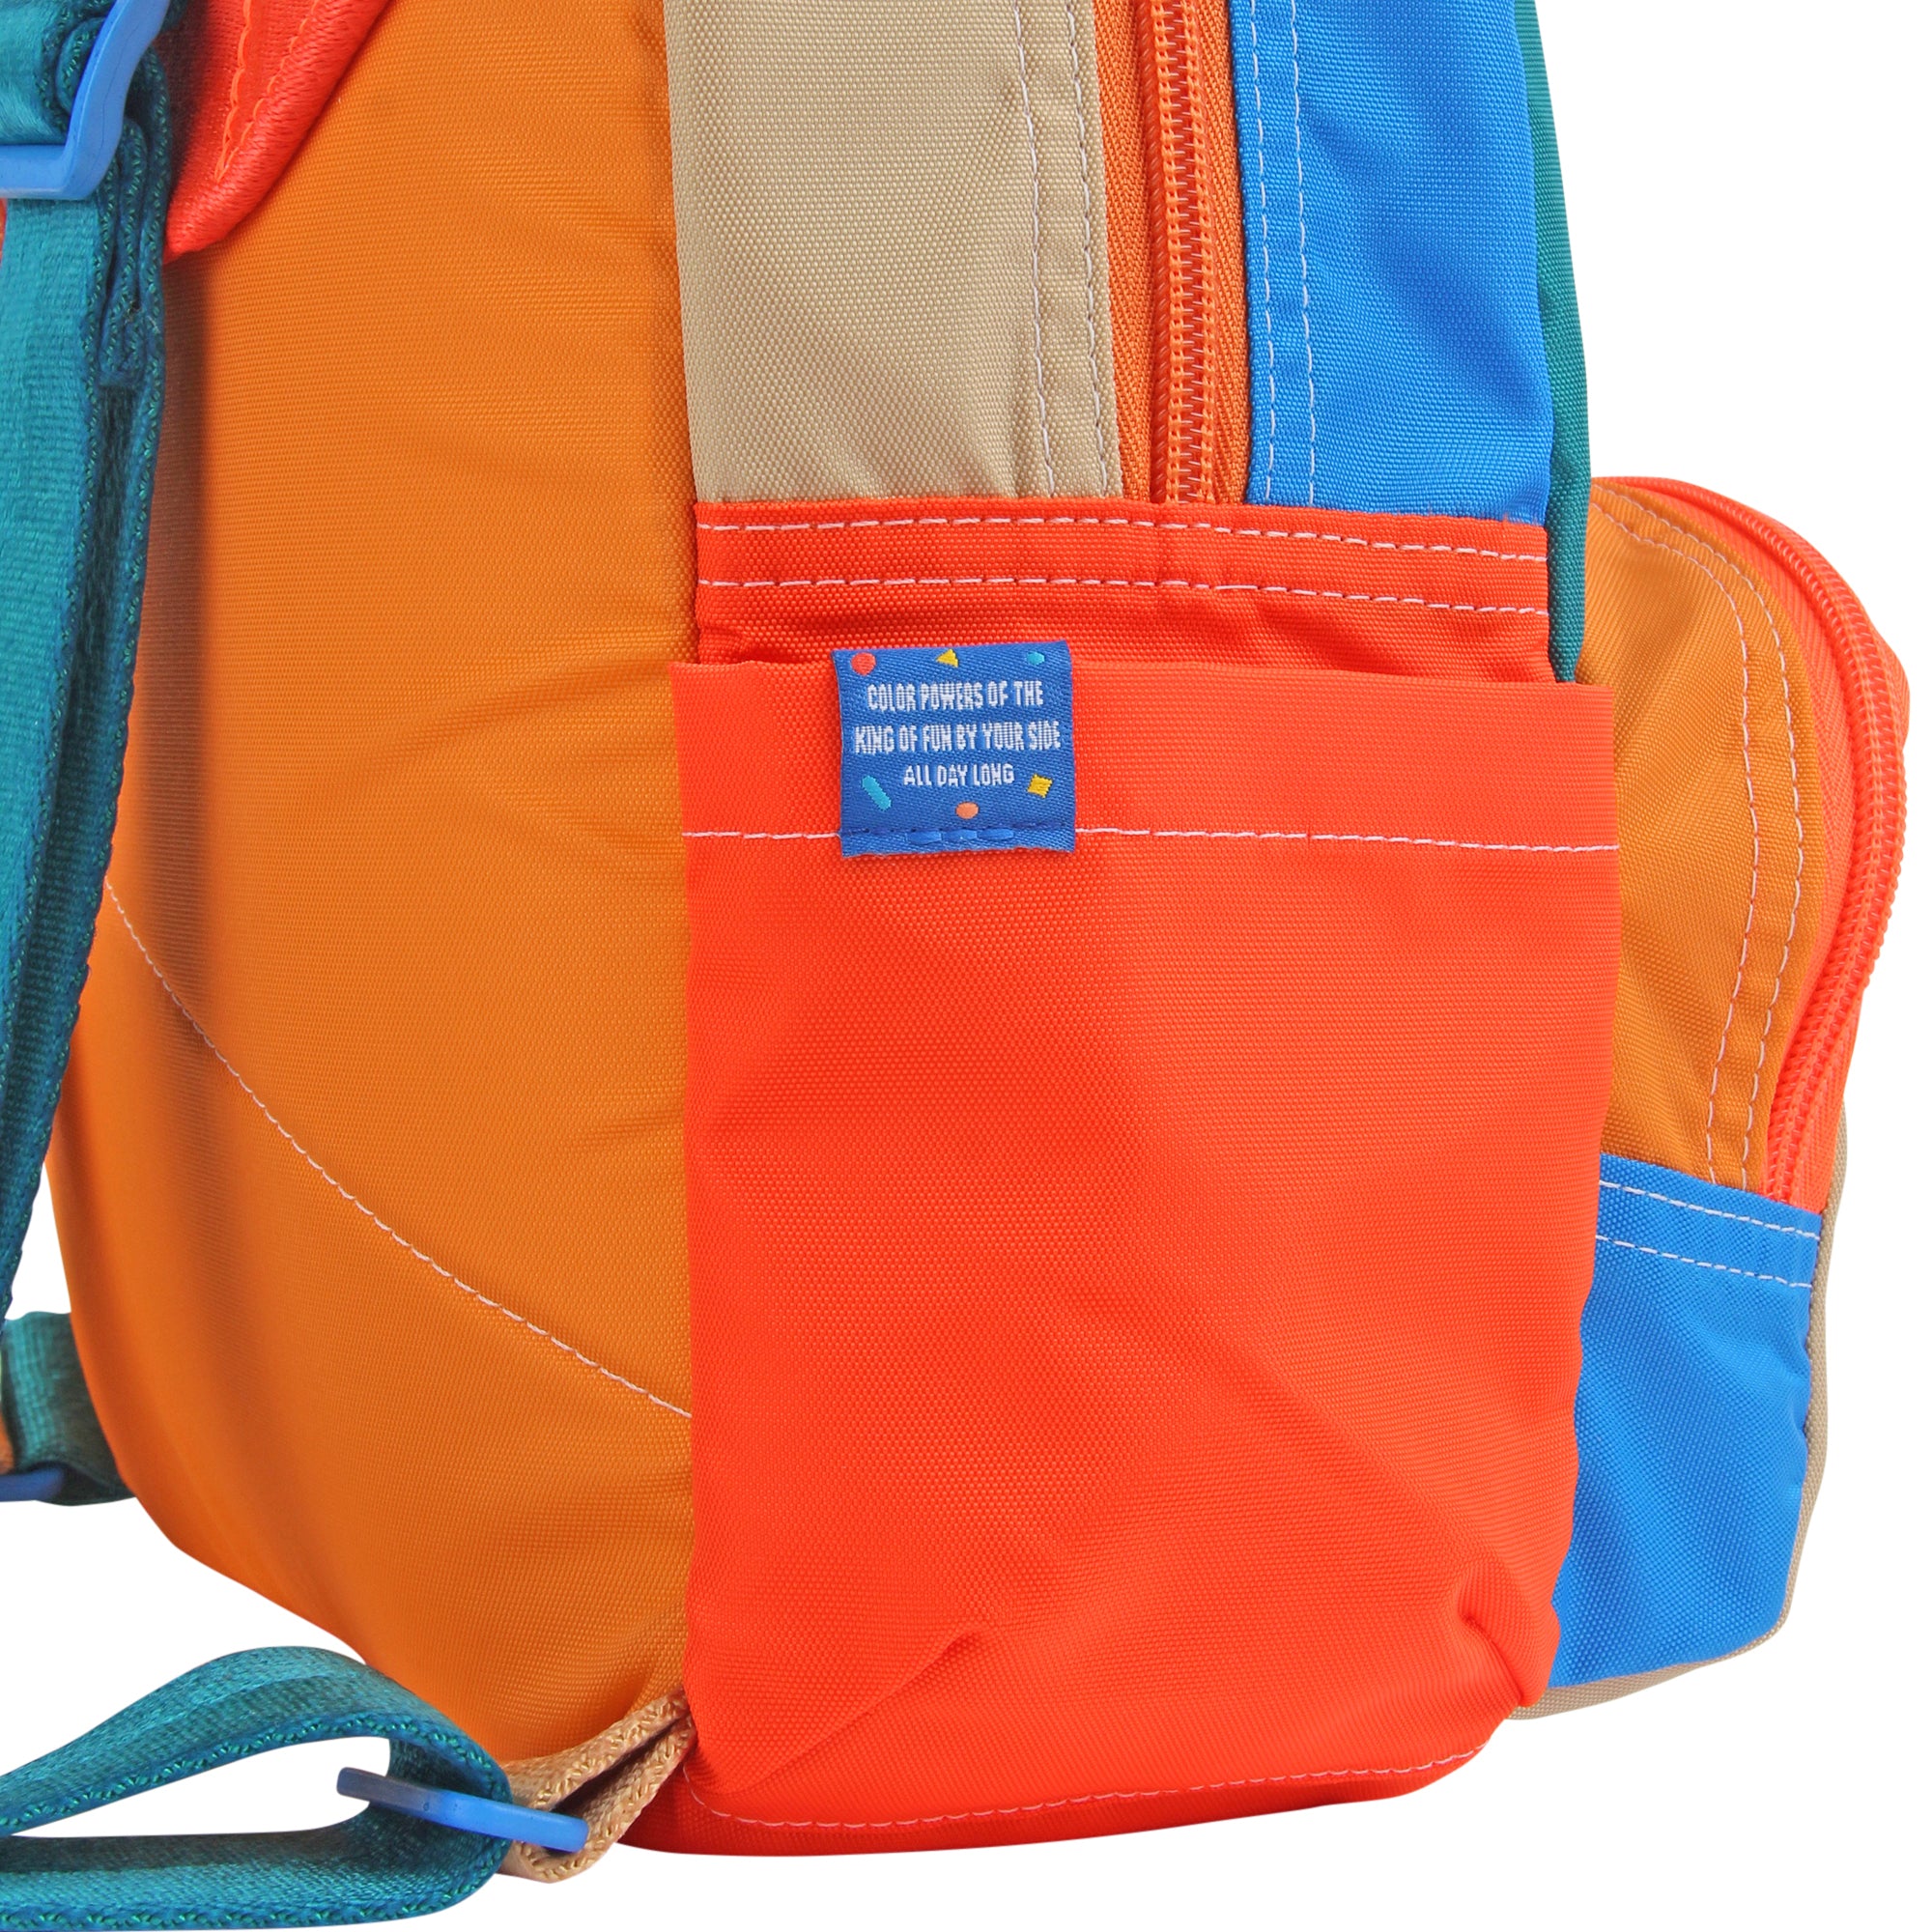 Mokuyobi - Super Rad Made in the USA Backpacks and Accessories